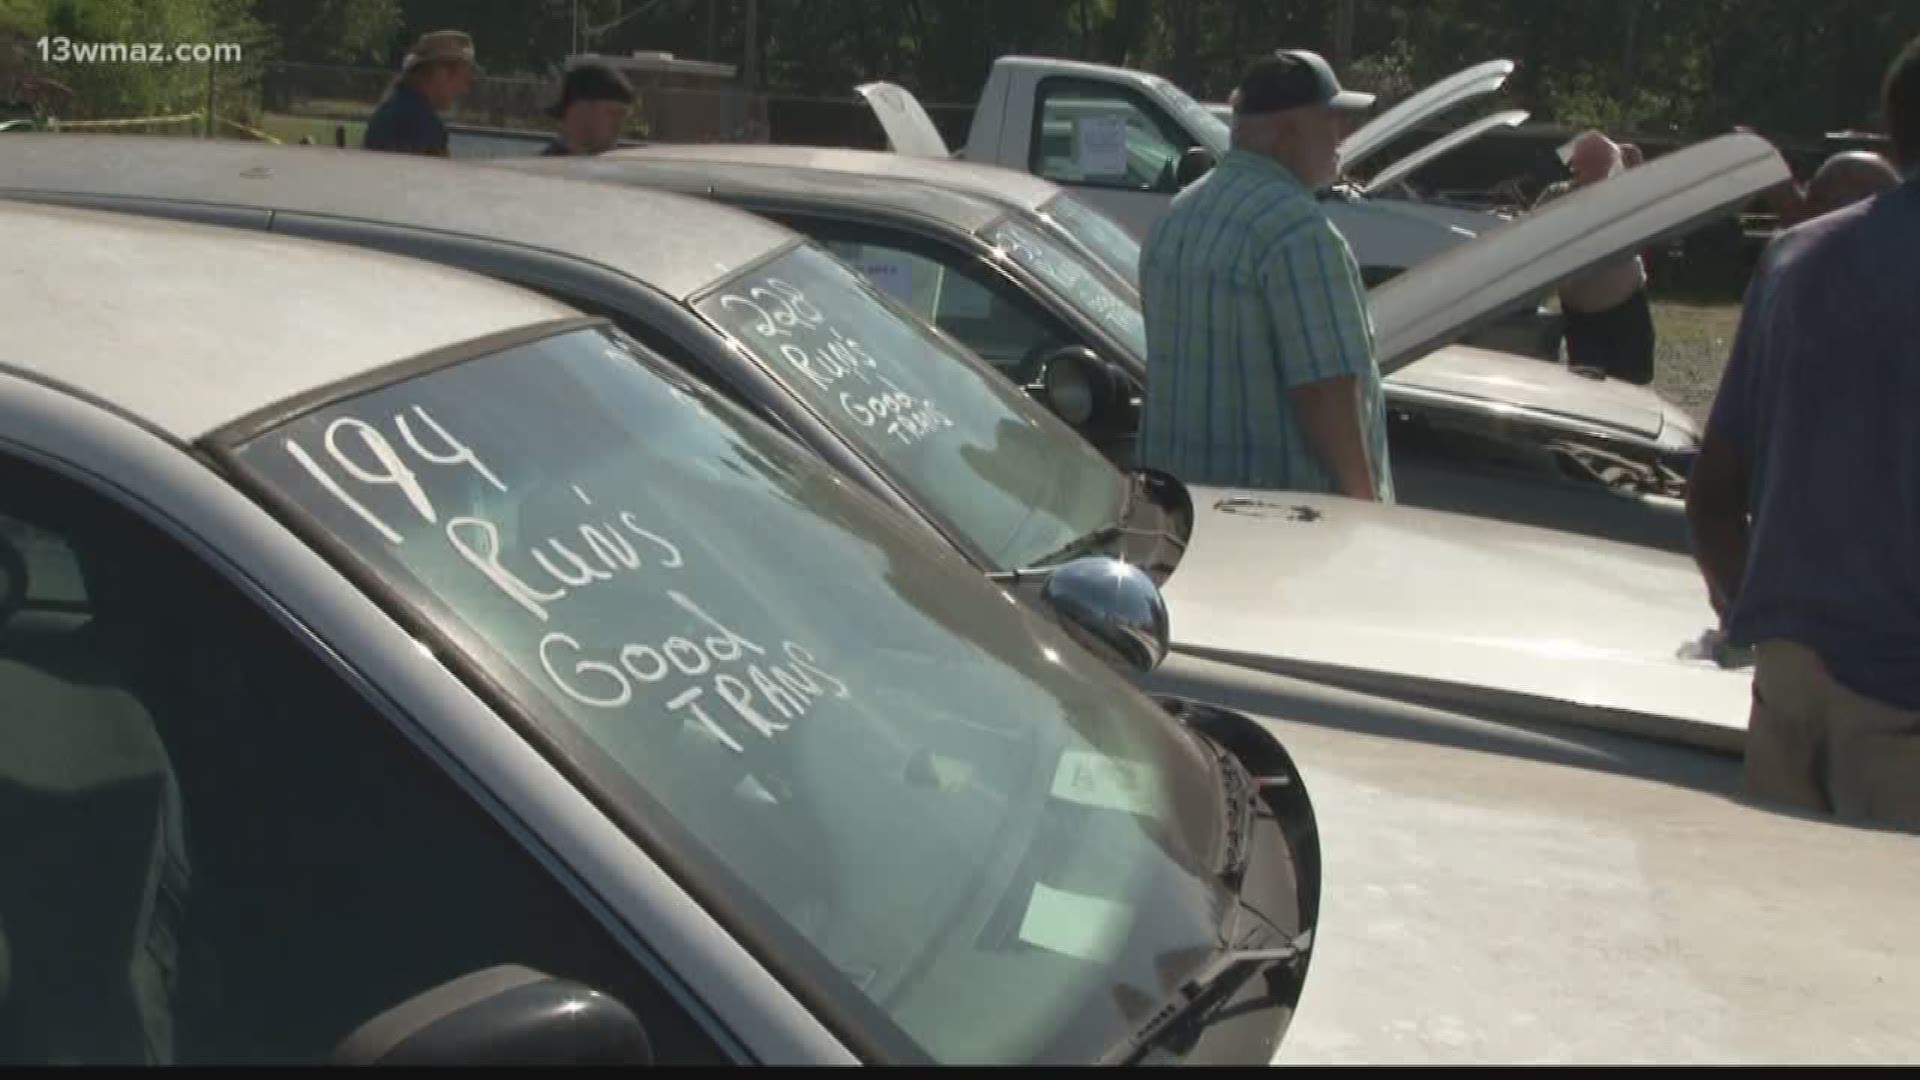 There's nothing like the sound of a good old-fashioned auction to start the day. That's how some kicked off their Friday in Warner Robins at the city's Vehicle Surplus Auction.